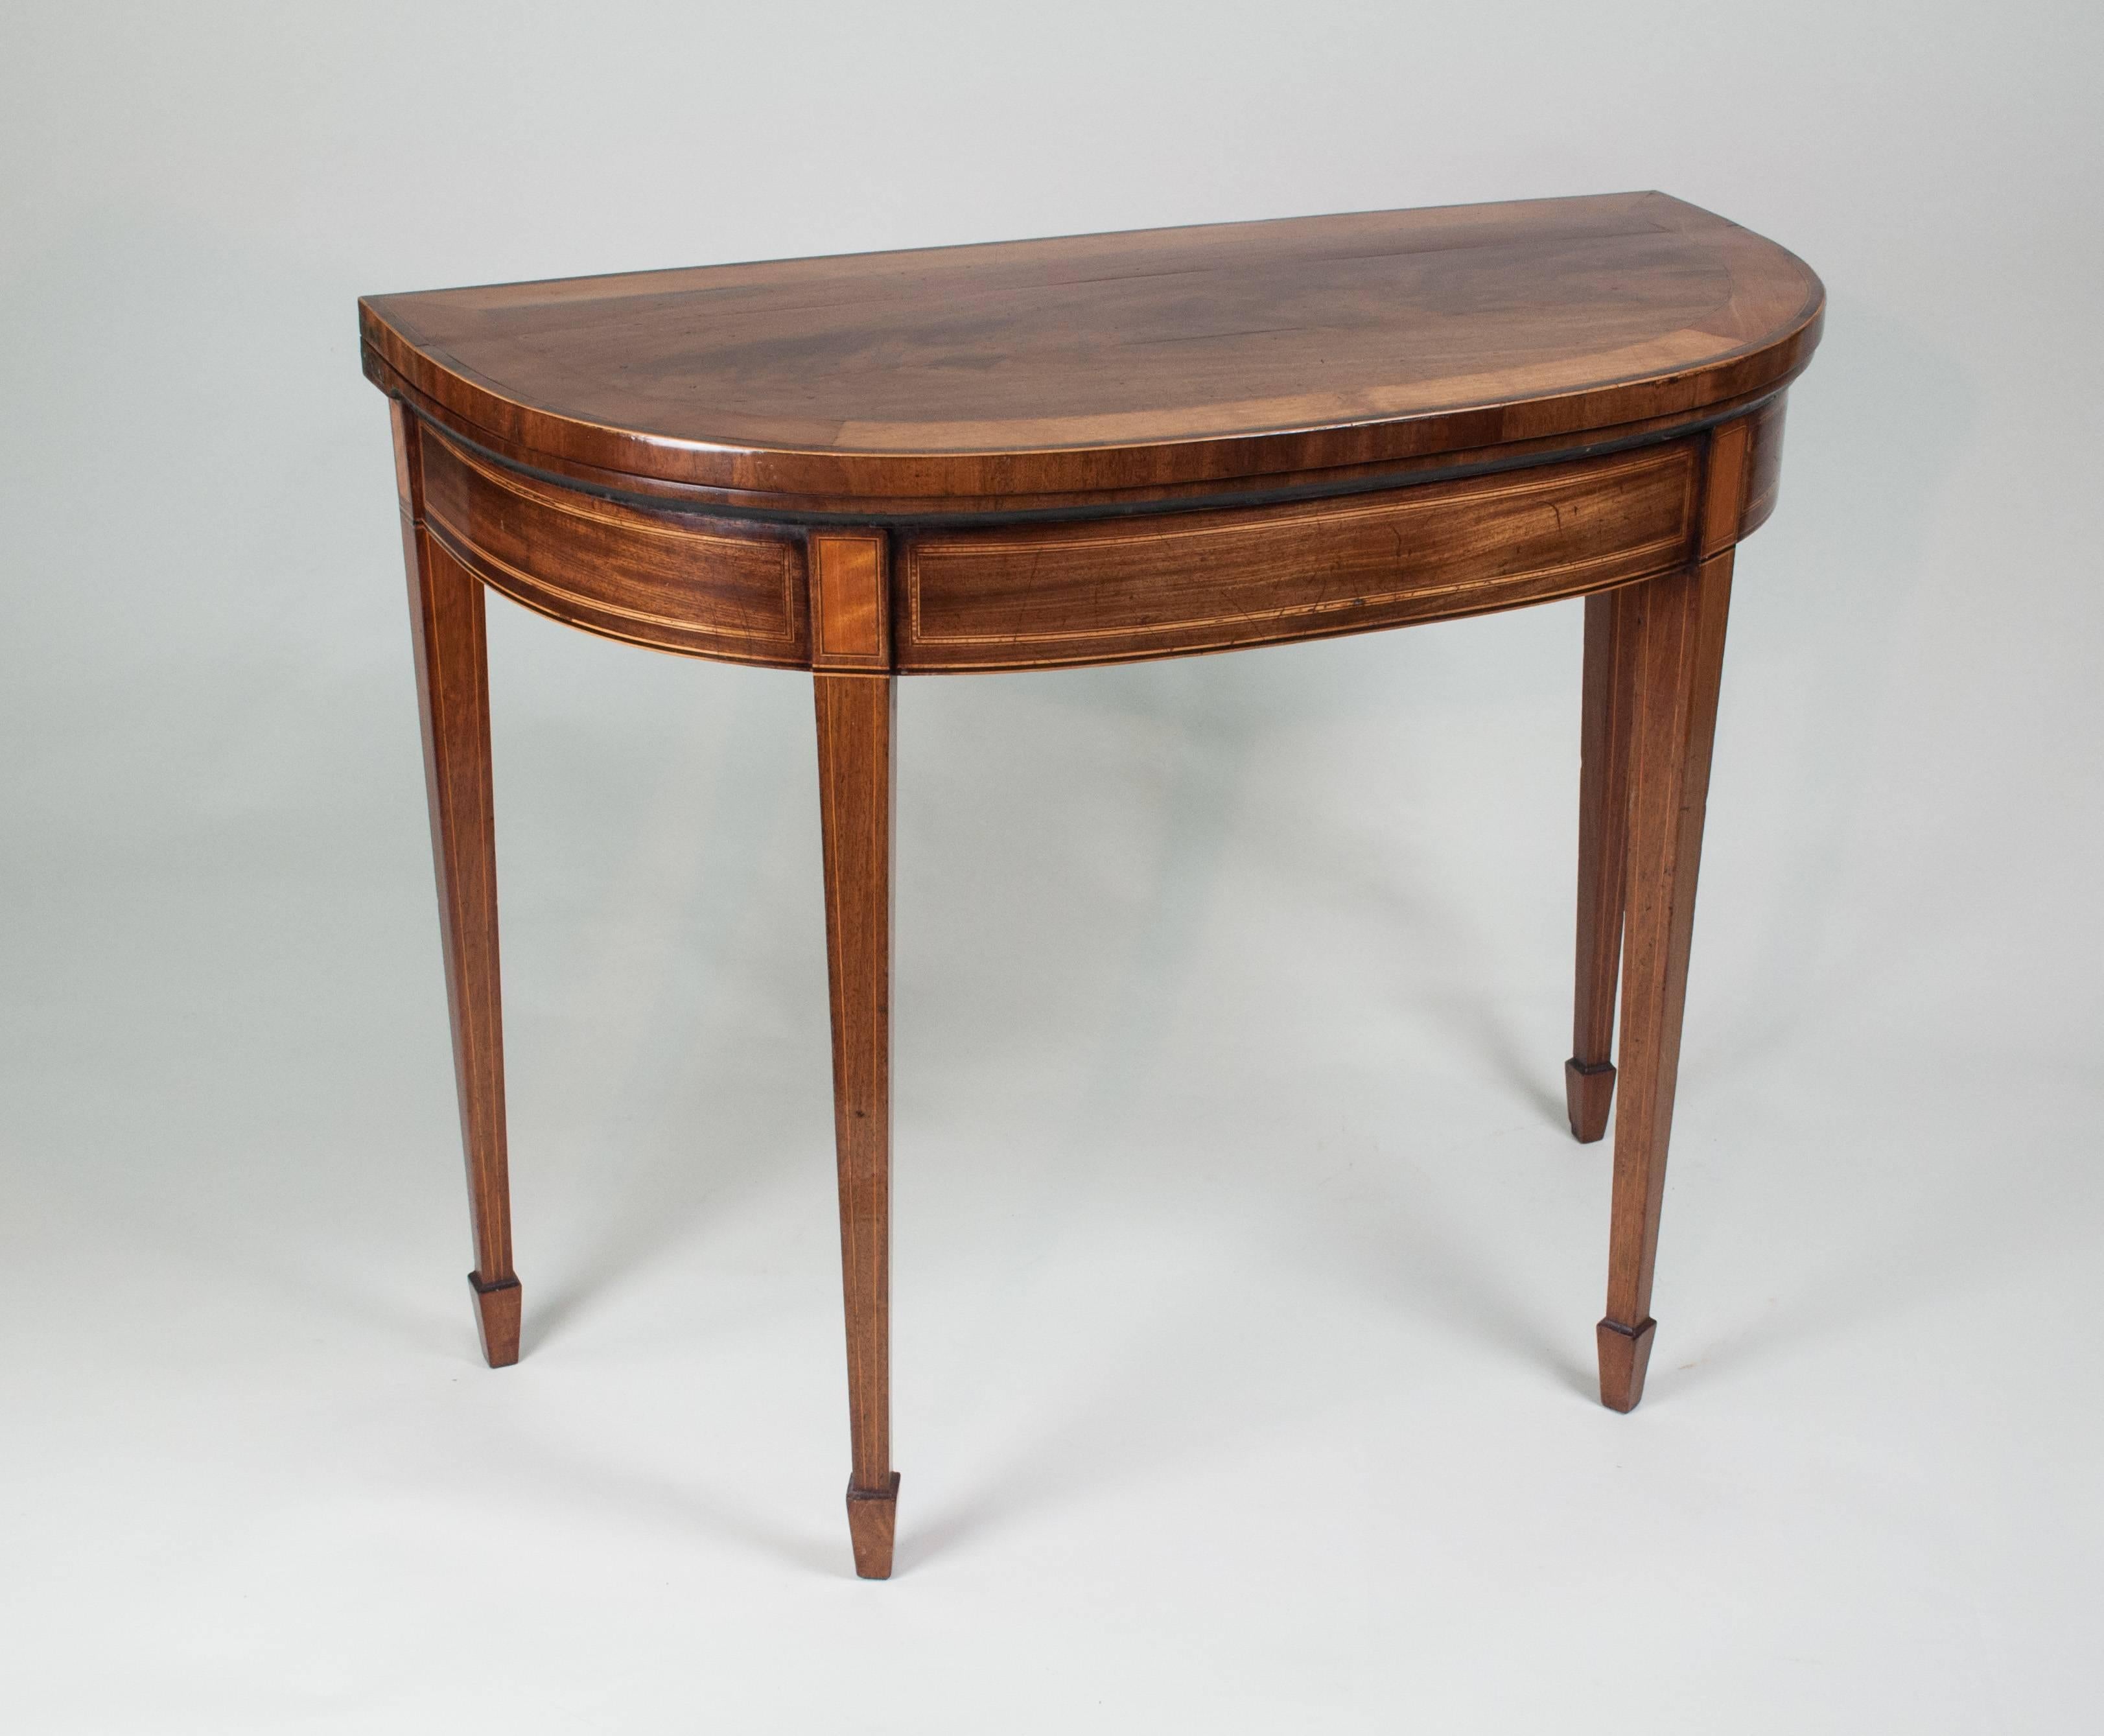 A very fine quality Hepplewhite period well figured mahogany ‘D’ shaped card table, the top with a wide banding of satinwood above a similarly banded apron and standing on square tapering, line-edged legs with spade feet.
I have a very similar